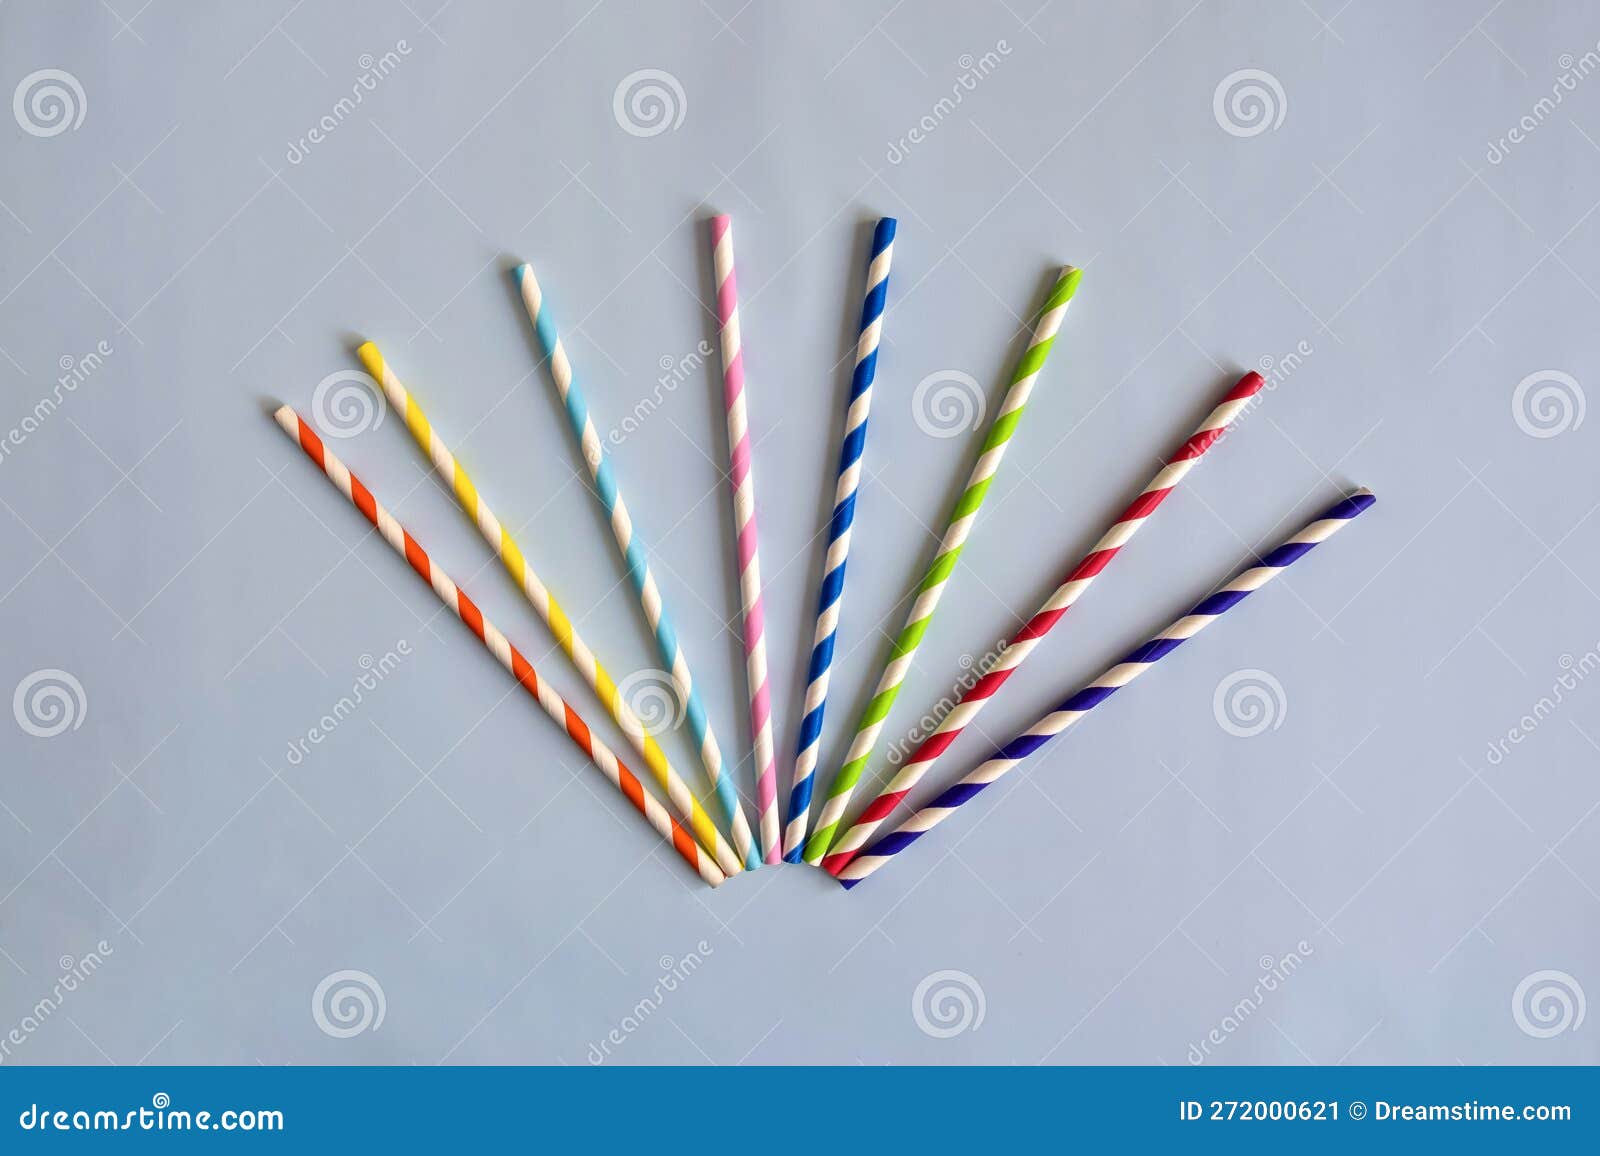 https://thumbs.dreamstime.com/z/disposable-colorful-striped-paper-cocktail-sticks-party-blue-background-eco-friendly-drinking-straws-choice-reduce-272000621.jpg